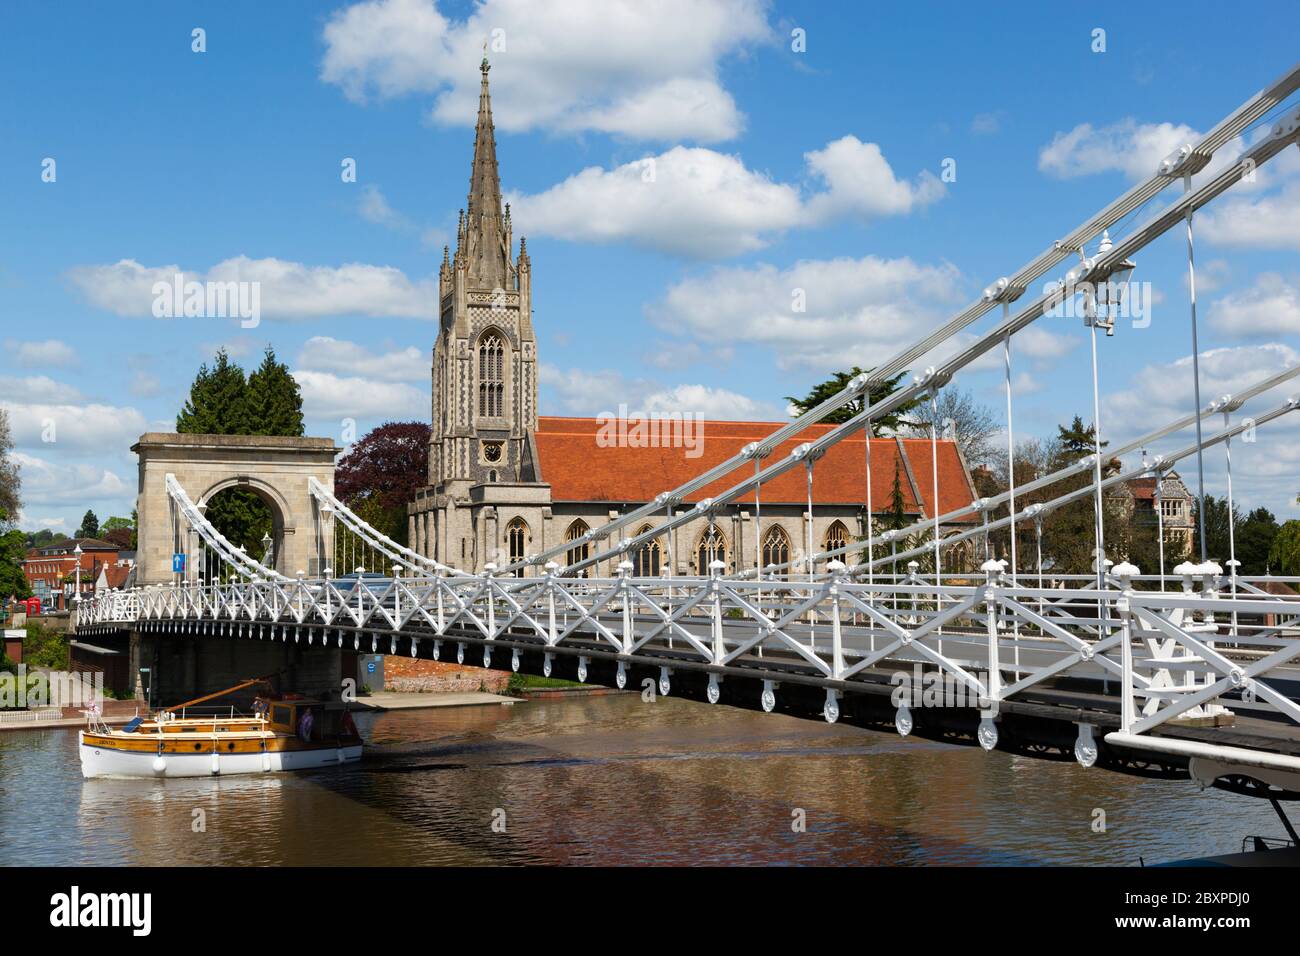 All Saints Church and suspension Bridge, Marlow, Buckinghamshire, Angleterre, Royaume-Uni, Europe Banque D'Images